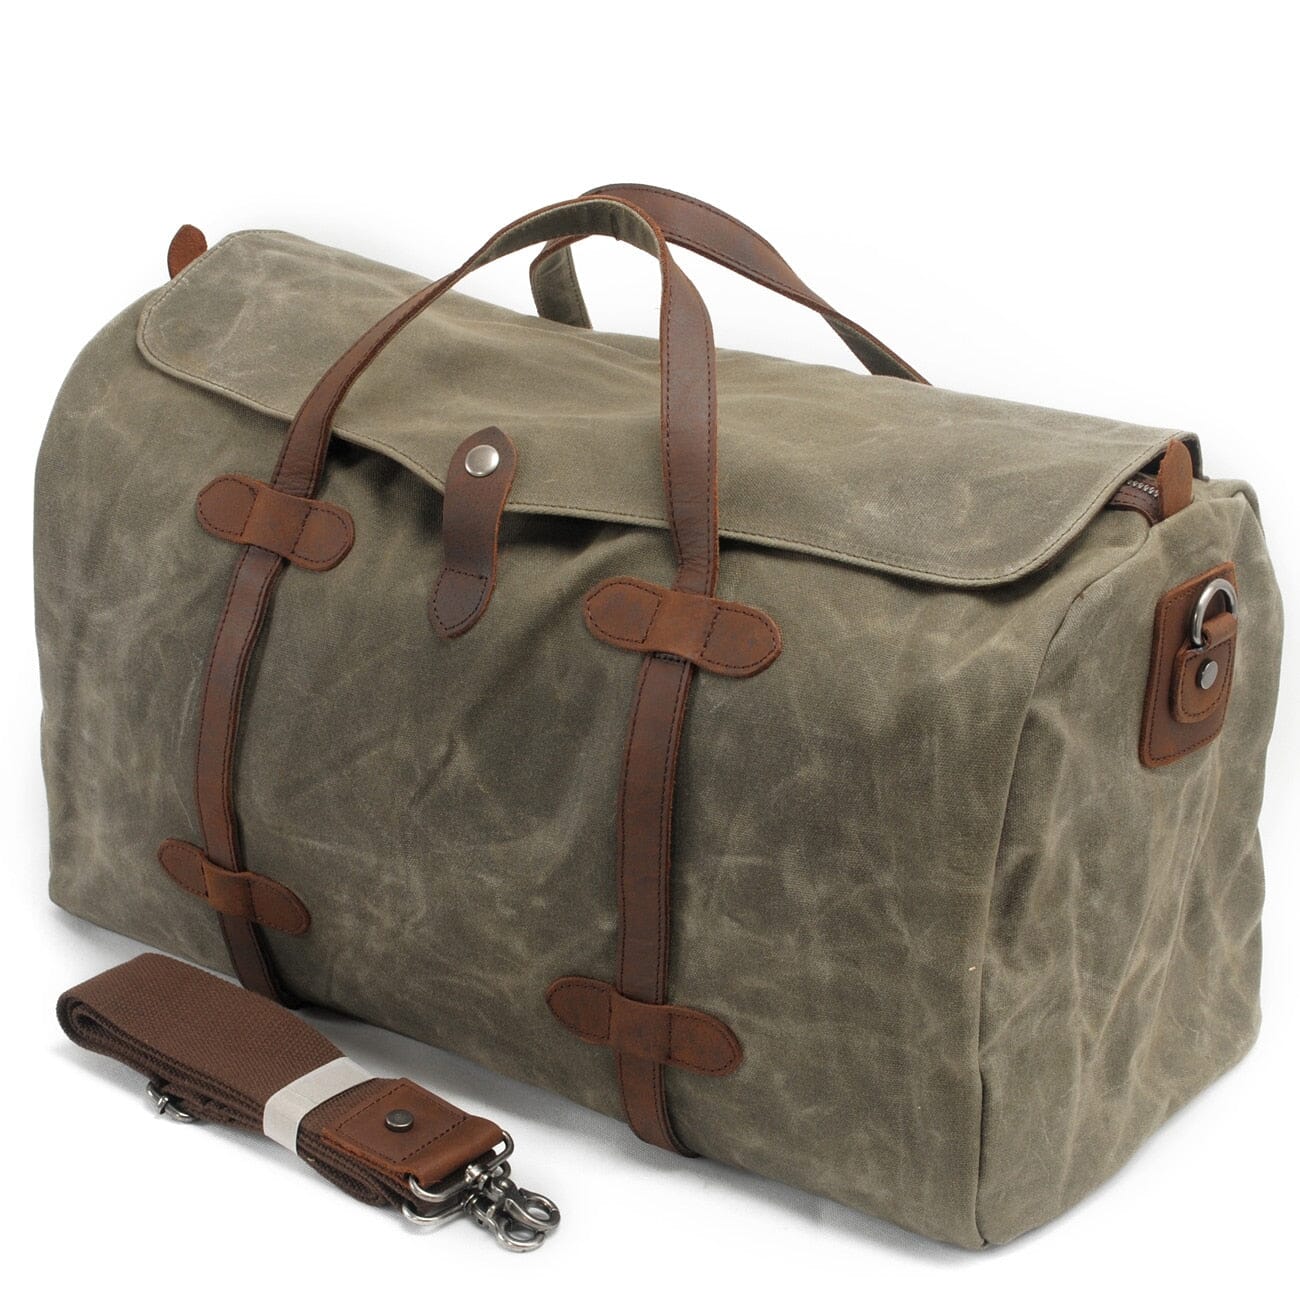 Western Overnight Bag The Store Bags Army Green 